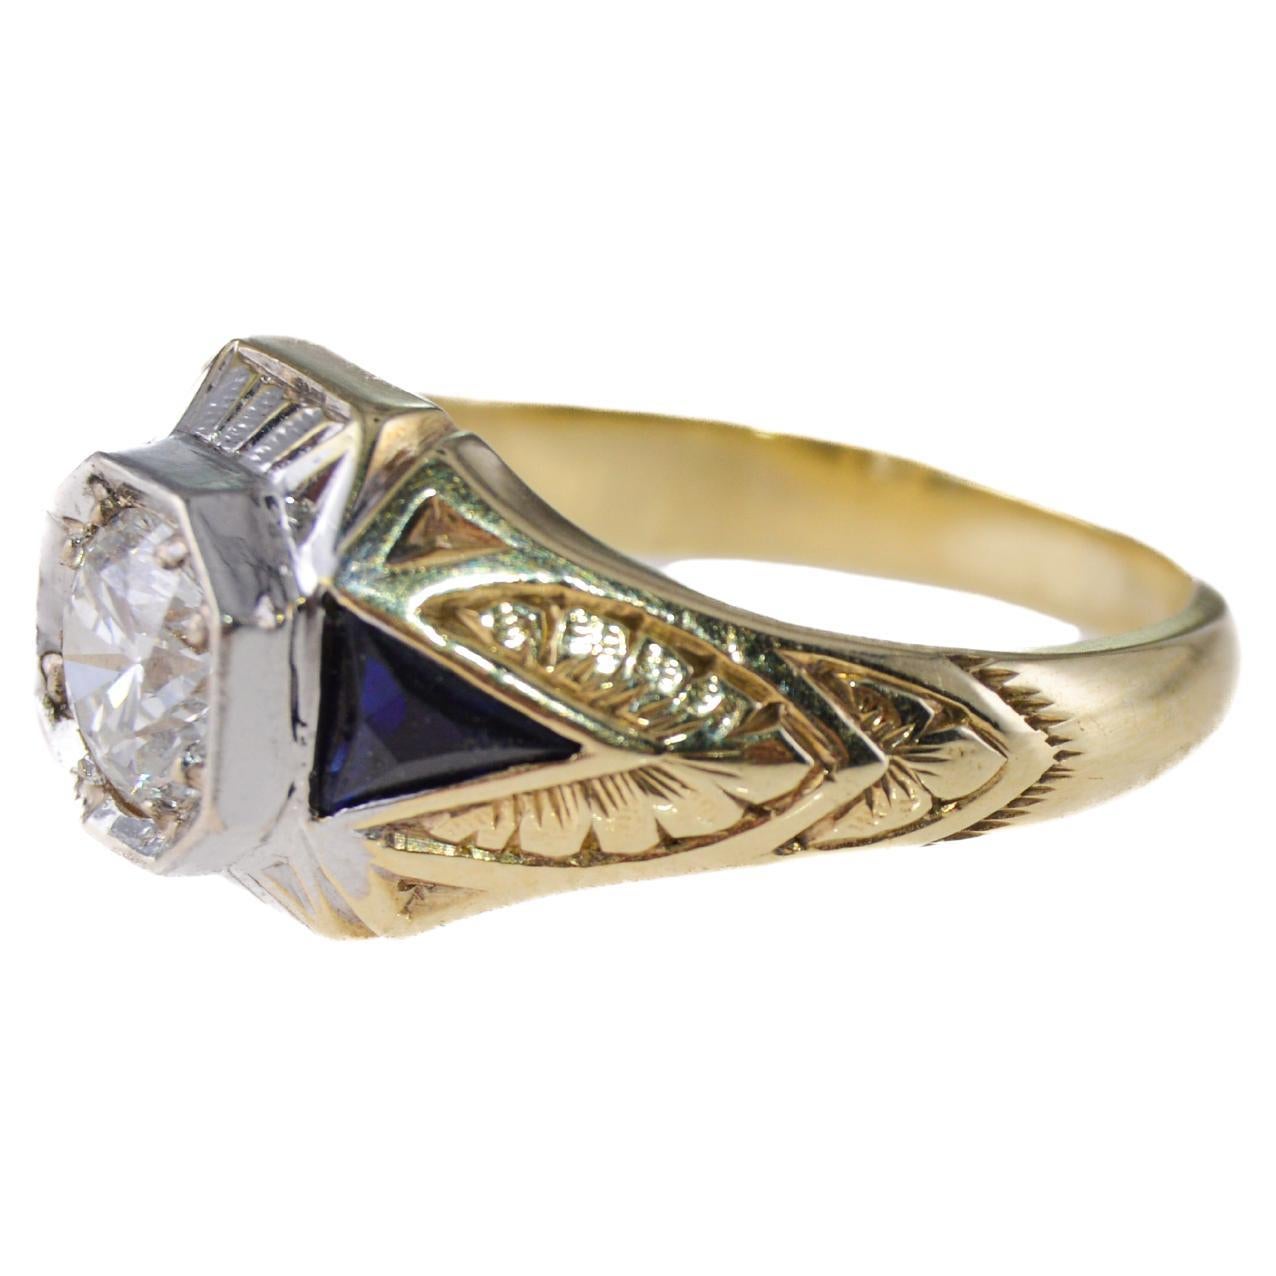 Art Deco Diamond Ring Solid 14k Yellow / White Gold Hand Engraved 0.70ct Diamond In Excellent Condition For Sale In Long Beach, CA